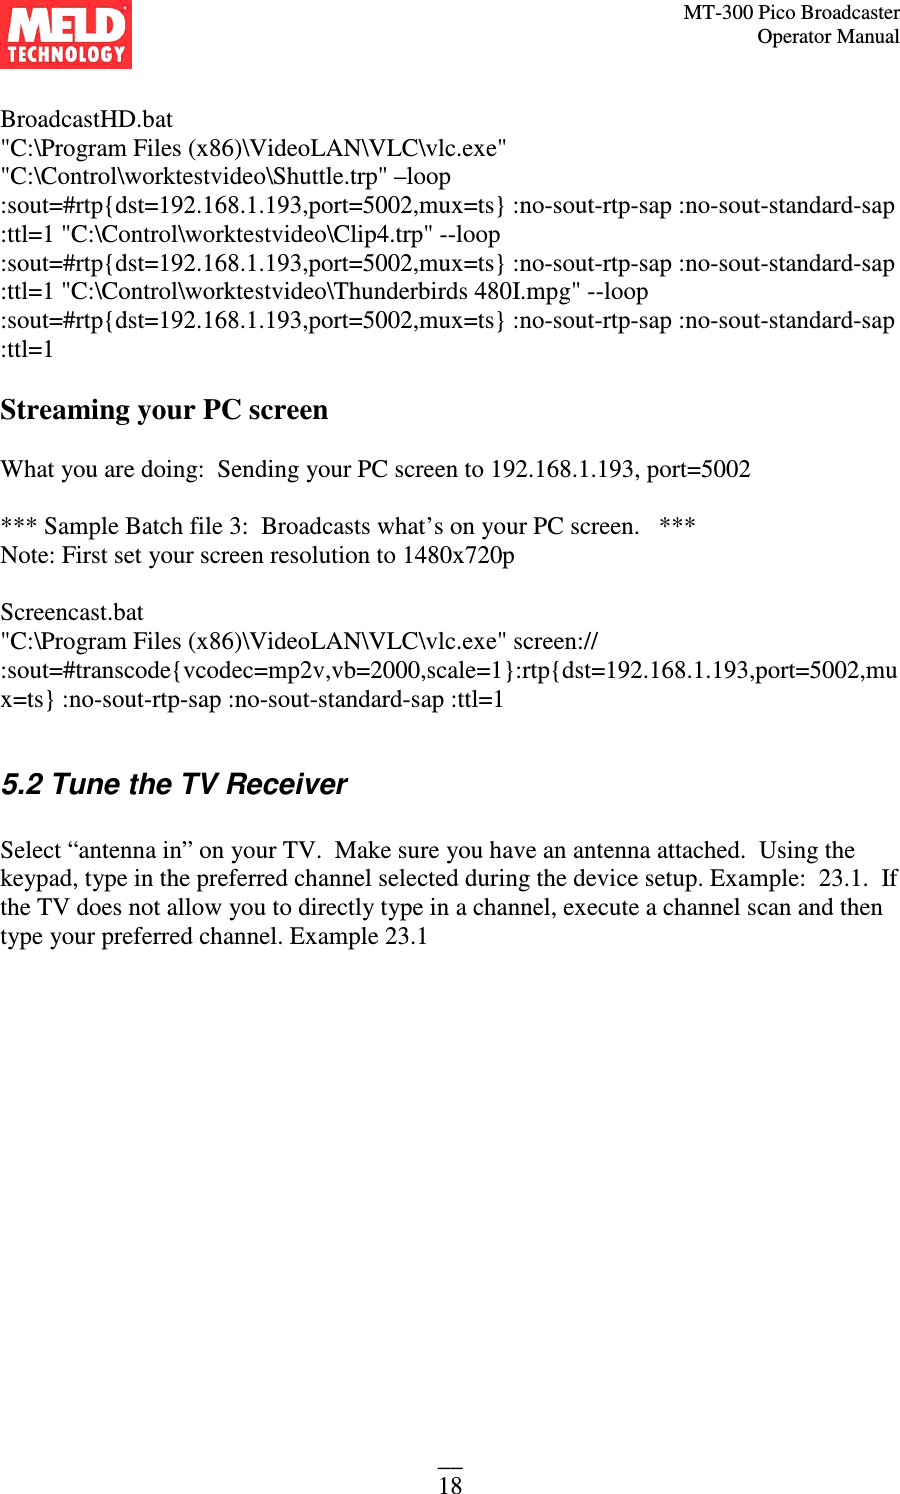 MT-300 Pico Broadcaster                                                                                                                                             Operator Manual __ 18  BroadcastHD.bat &quot;C:\Program Files (x86)\VideoLAN\VLC\vlc.exe&quot; &quot;C:\Control\worktestvideo\Shuttle.trp&quot; –loop :sout=#rtp{dst=192.168.1.193,port=5002,mux=ts} :no-sout-rtp-sap :no-sout-standard-sap :ttl=1 &quot;C:\Control\worktestvideo\Clip4.trp&quot; --loop :sout=#rtp{dst=192.168.1.193,port=5002,mux=ts} :no-sout-rtp-sap :no-sout-standard-sap :ttl=1 &quot;C:\Control\worktestvideo\Thunderbirds 480I.mpg&quot; --loop :sout=#rtp{dst=192.168.1.193,port=5002,mux=ts} :no-sout-rtp-sap :no-sout-standard-sap :ttl=1  Streaming your PC screen  What you are doing:  Sending your PC screen to 192.168.1.193, port=5002  *** Sample Batch file 3:  Broadcasts what’s on your PC screen.   ***  Note: First set your screen resolution to 1480x720p  Screencast.bat &quot;C:\Program Files (x86)\VideoLAN\VLC\vlc.exe&quot; screen:// :sout=#transcode{vcodec=mp2v,vb=2000,scale=1}:rtp{dst=192.168.1.193,port=5002,mux=ts} :no-sout-rtp-sap :no-sout-standard-sap :ttl=1  5.2 Tune the TV Receiver  Select “antenna in” on your TV.  Make sure you have an antenna attached.  Using the keypad, type in the preferred channel selected during the device setup. Example:  23.1.  If the TV does not allow you to directly type in a channel, execute a channel scan and then type your preferred channel. Example 23.1   